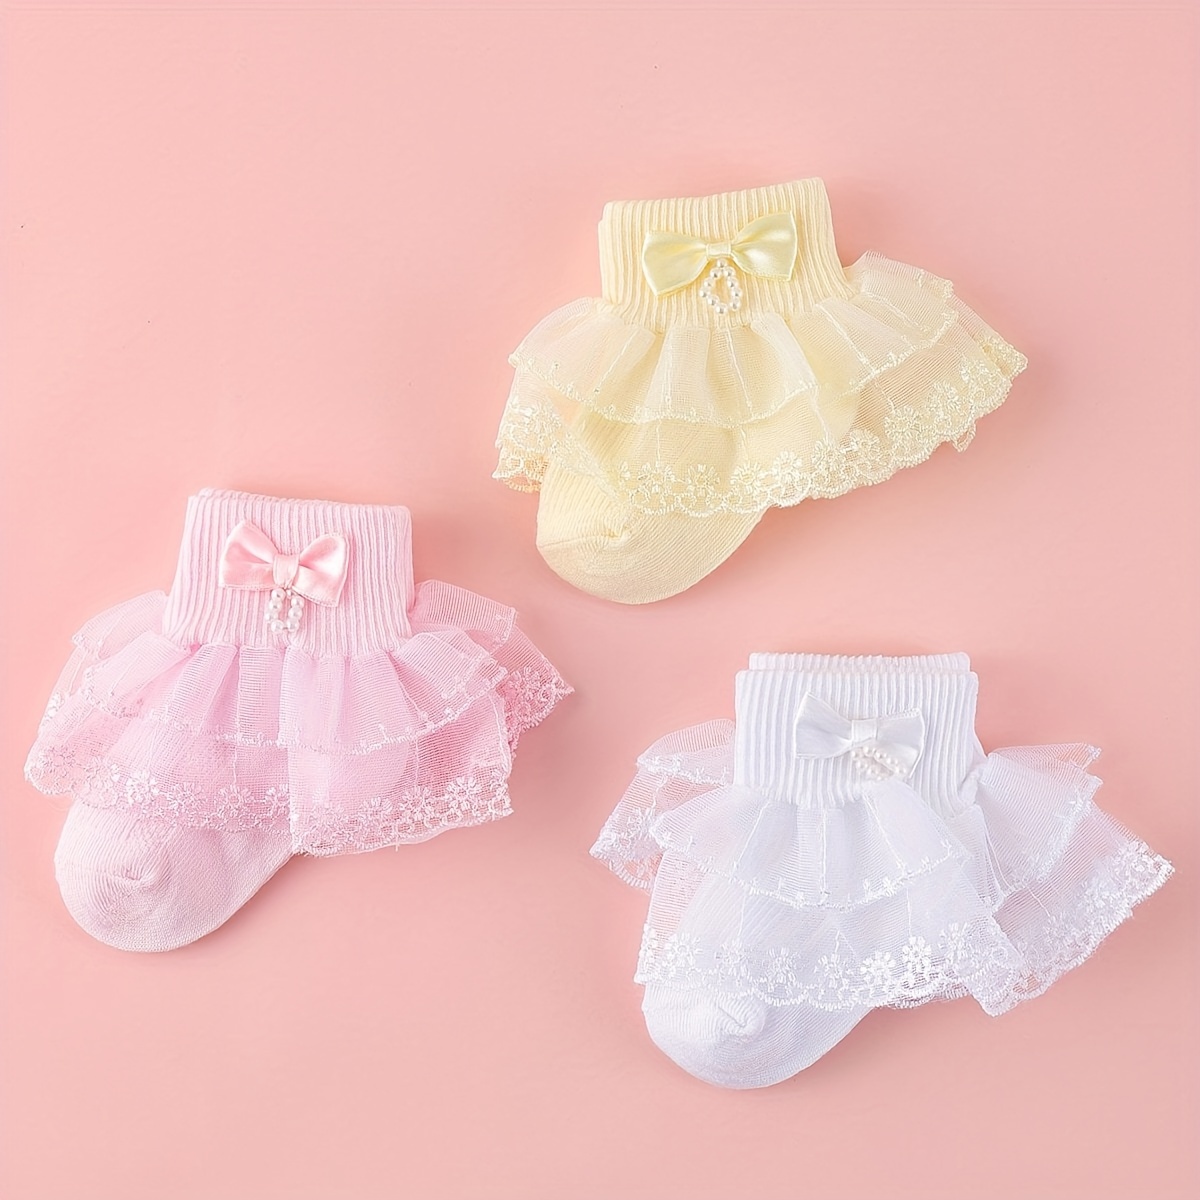 

3 Pairs Of Kid's Cotton Blend Fashion Cute Low-cut Socks With Bow & Lace Trim, Comfy Breathable Princess Style Socks For Daily Wearing